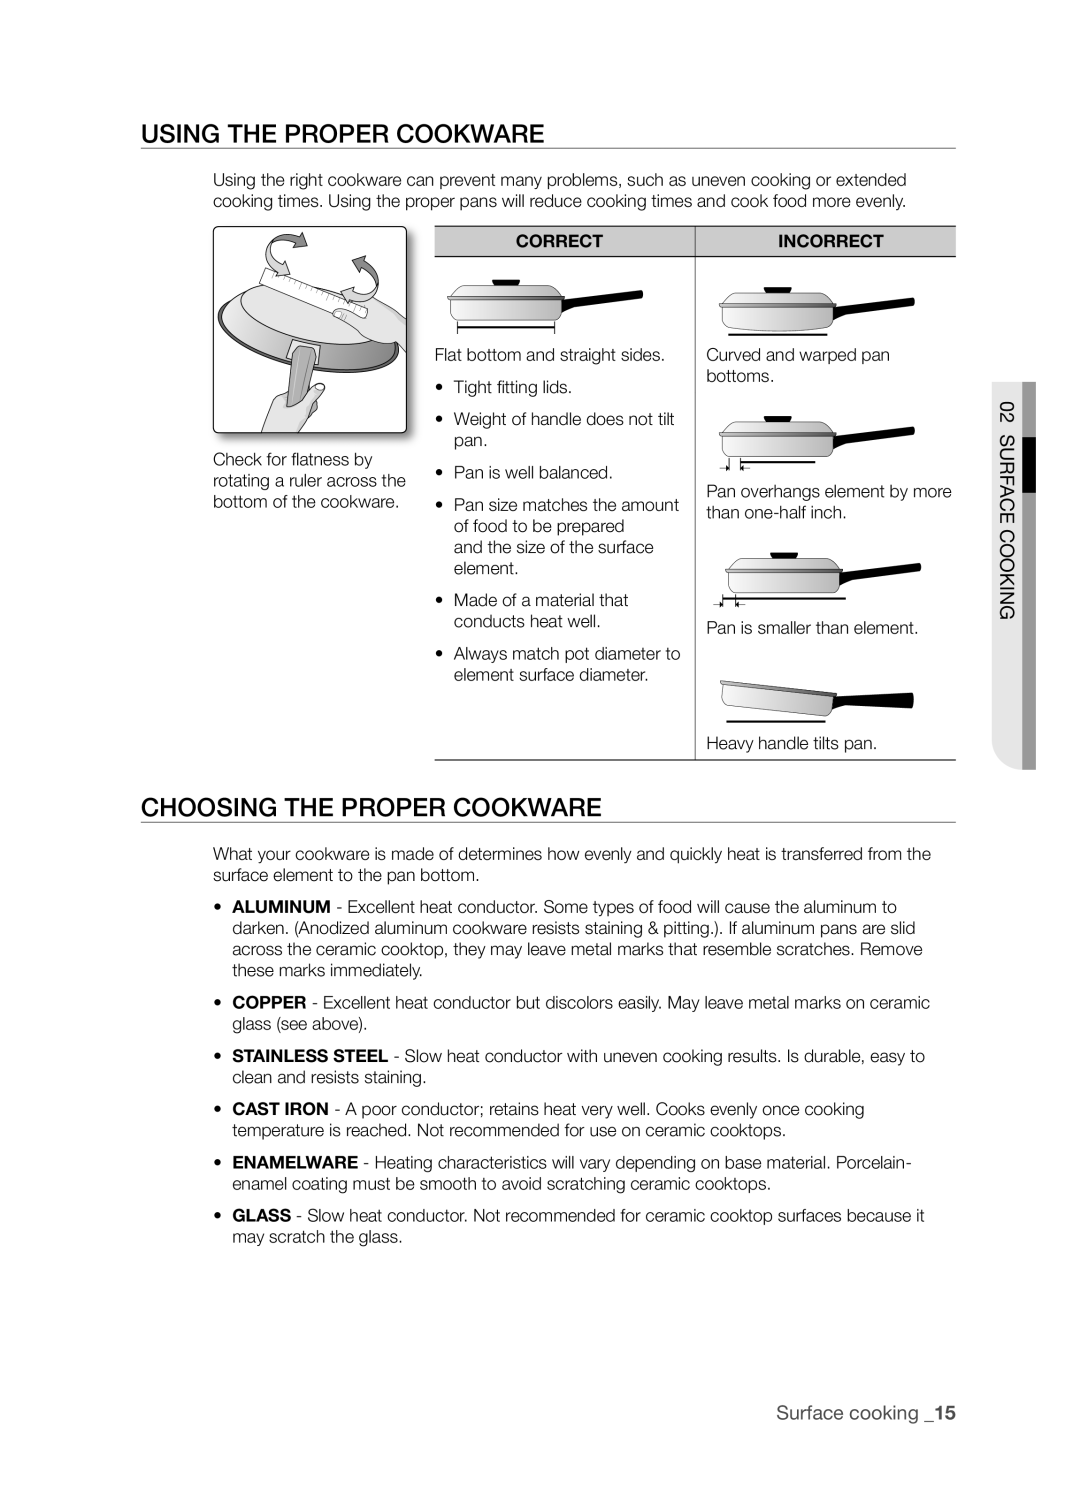 Samsung FTQ386LWUX user manual Using The Proper Cookware, Choosing The Proper Cookware, Surface cooking 1, Surface Cooking 